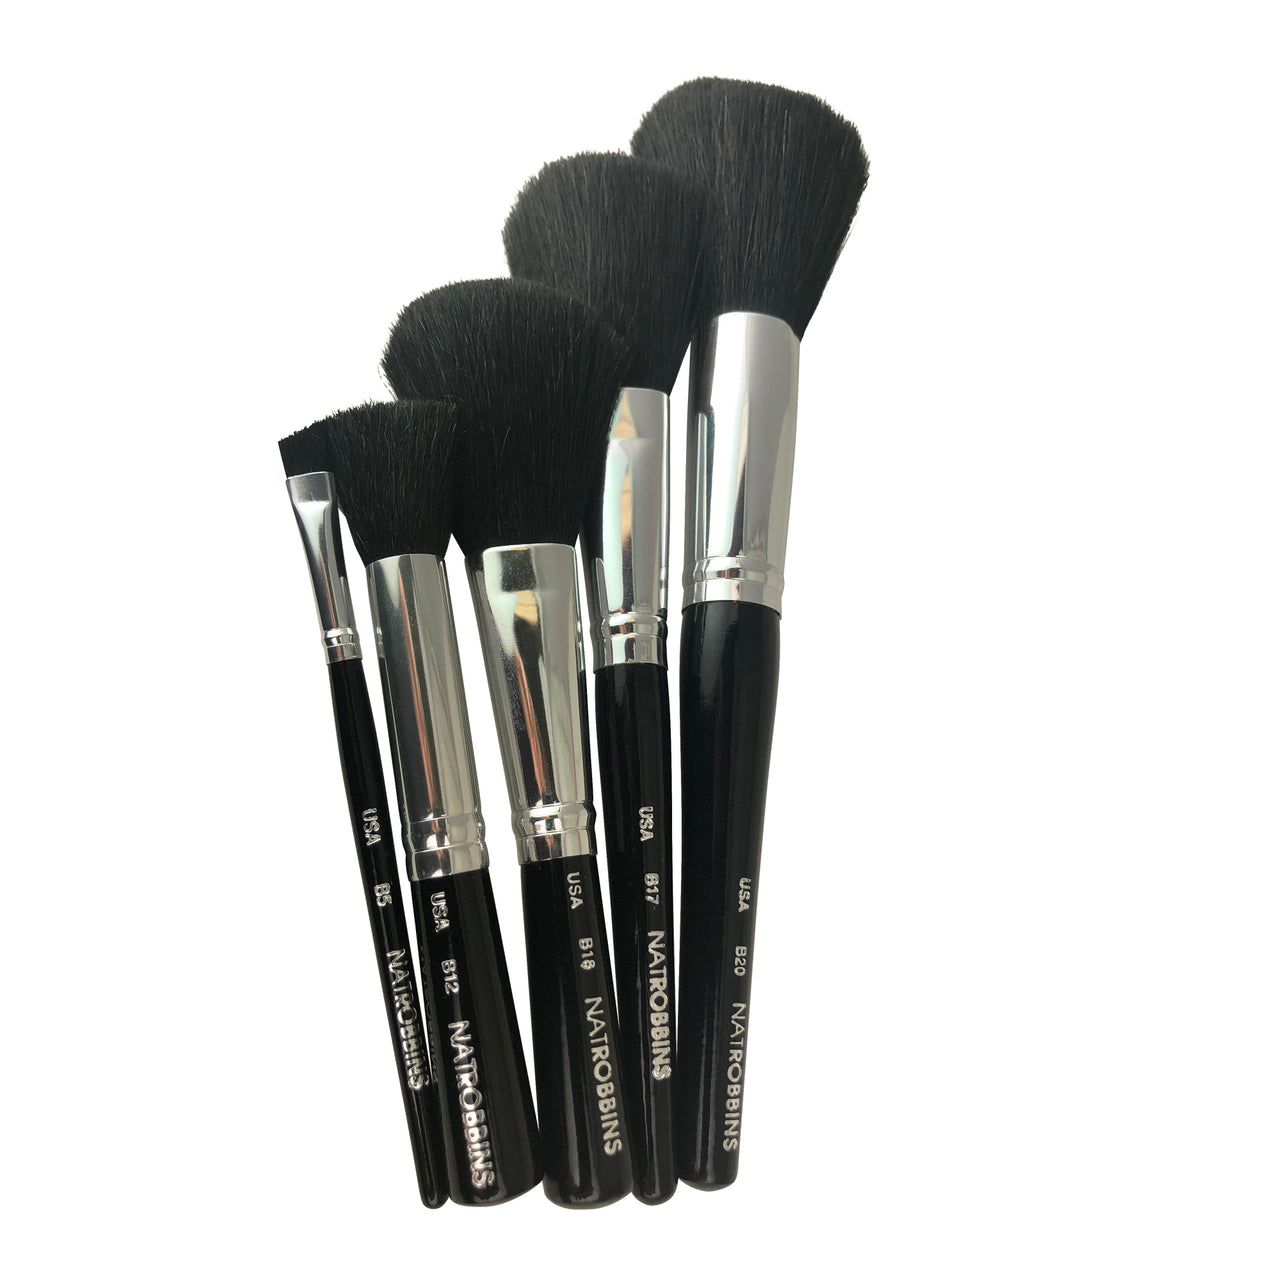 Nat Robbins Set of Four Natural Bristles Makeup Brushes #B12,17,B18, B20 and One #B5 (synthetic) This is a Set of 5 Premium Quality Make-Up Brushes.